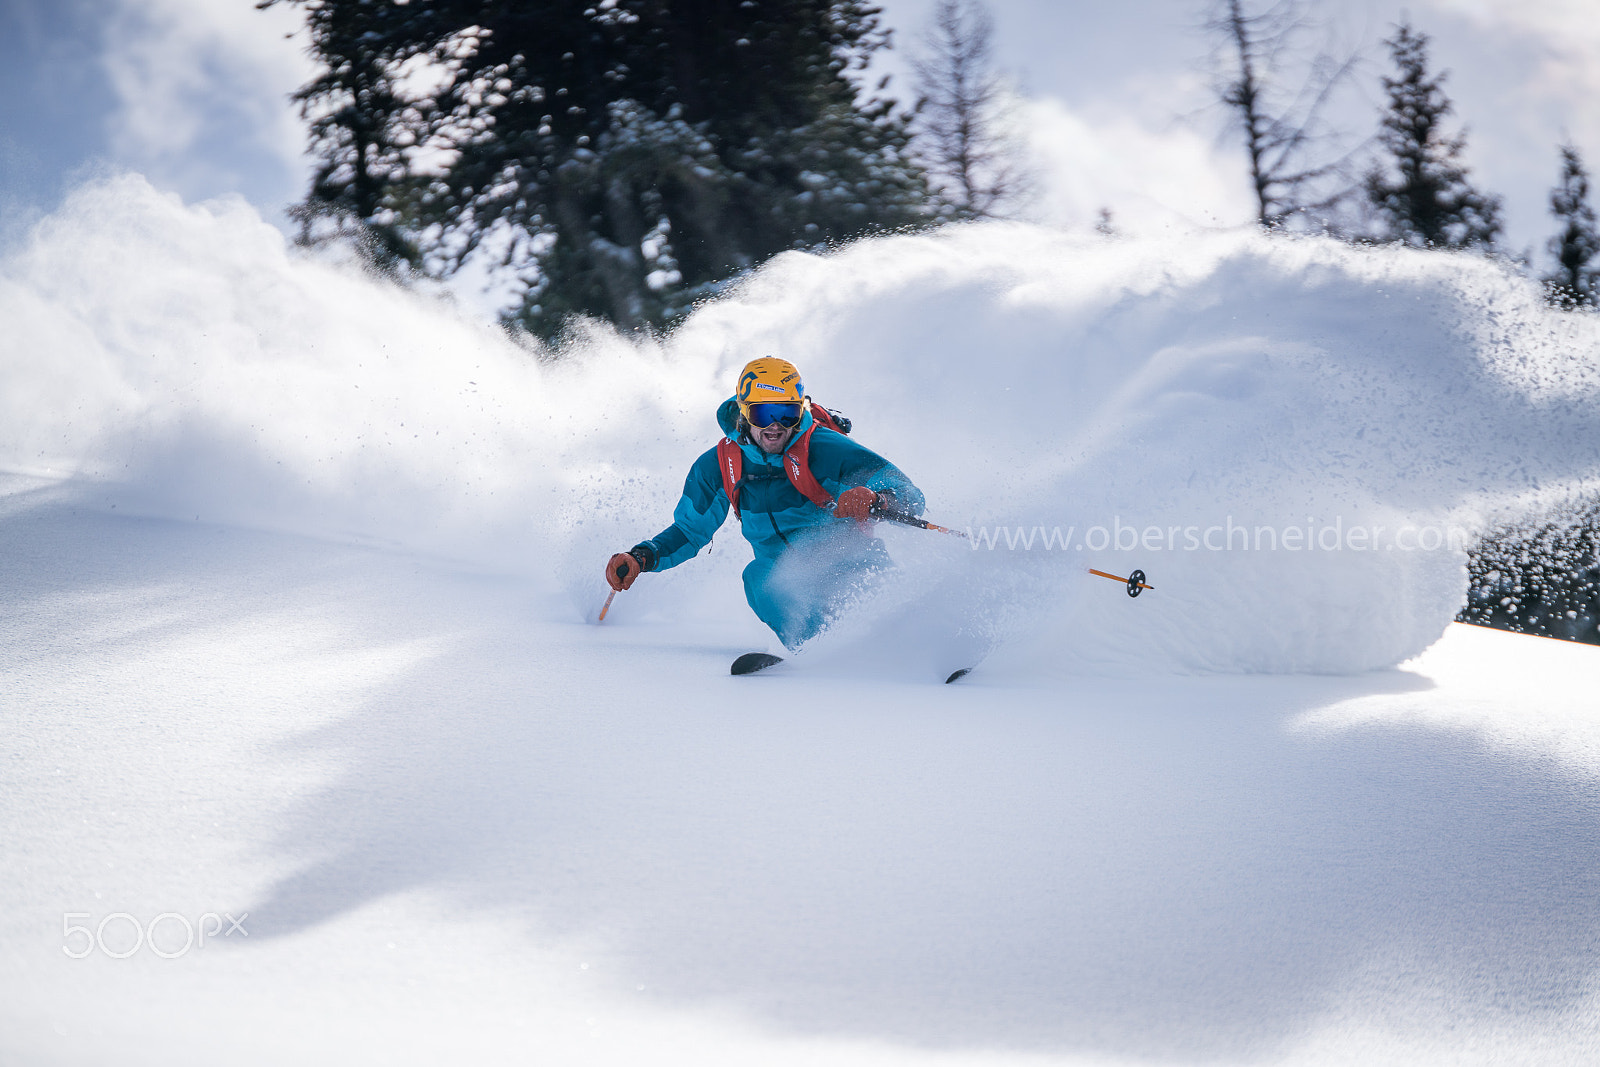 Sony a99 II + Tamron SP 70-200mm F2.8 Di VC USD sample photo. Powder skiing in the alps #1 photography